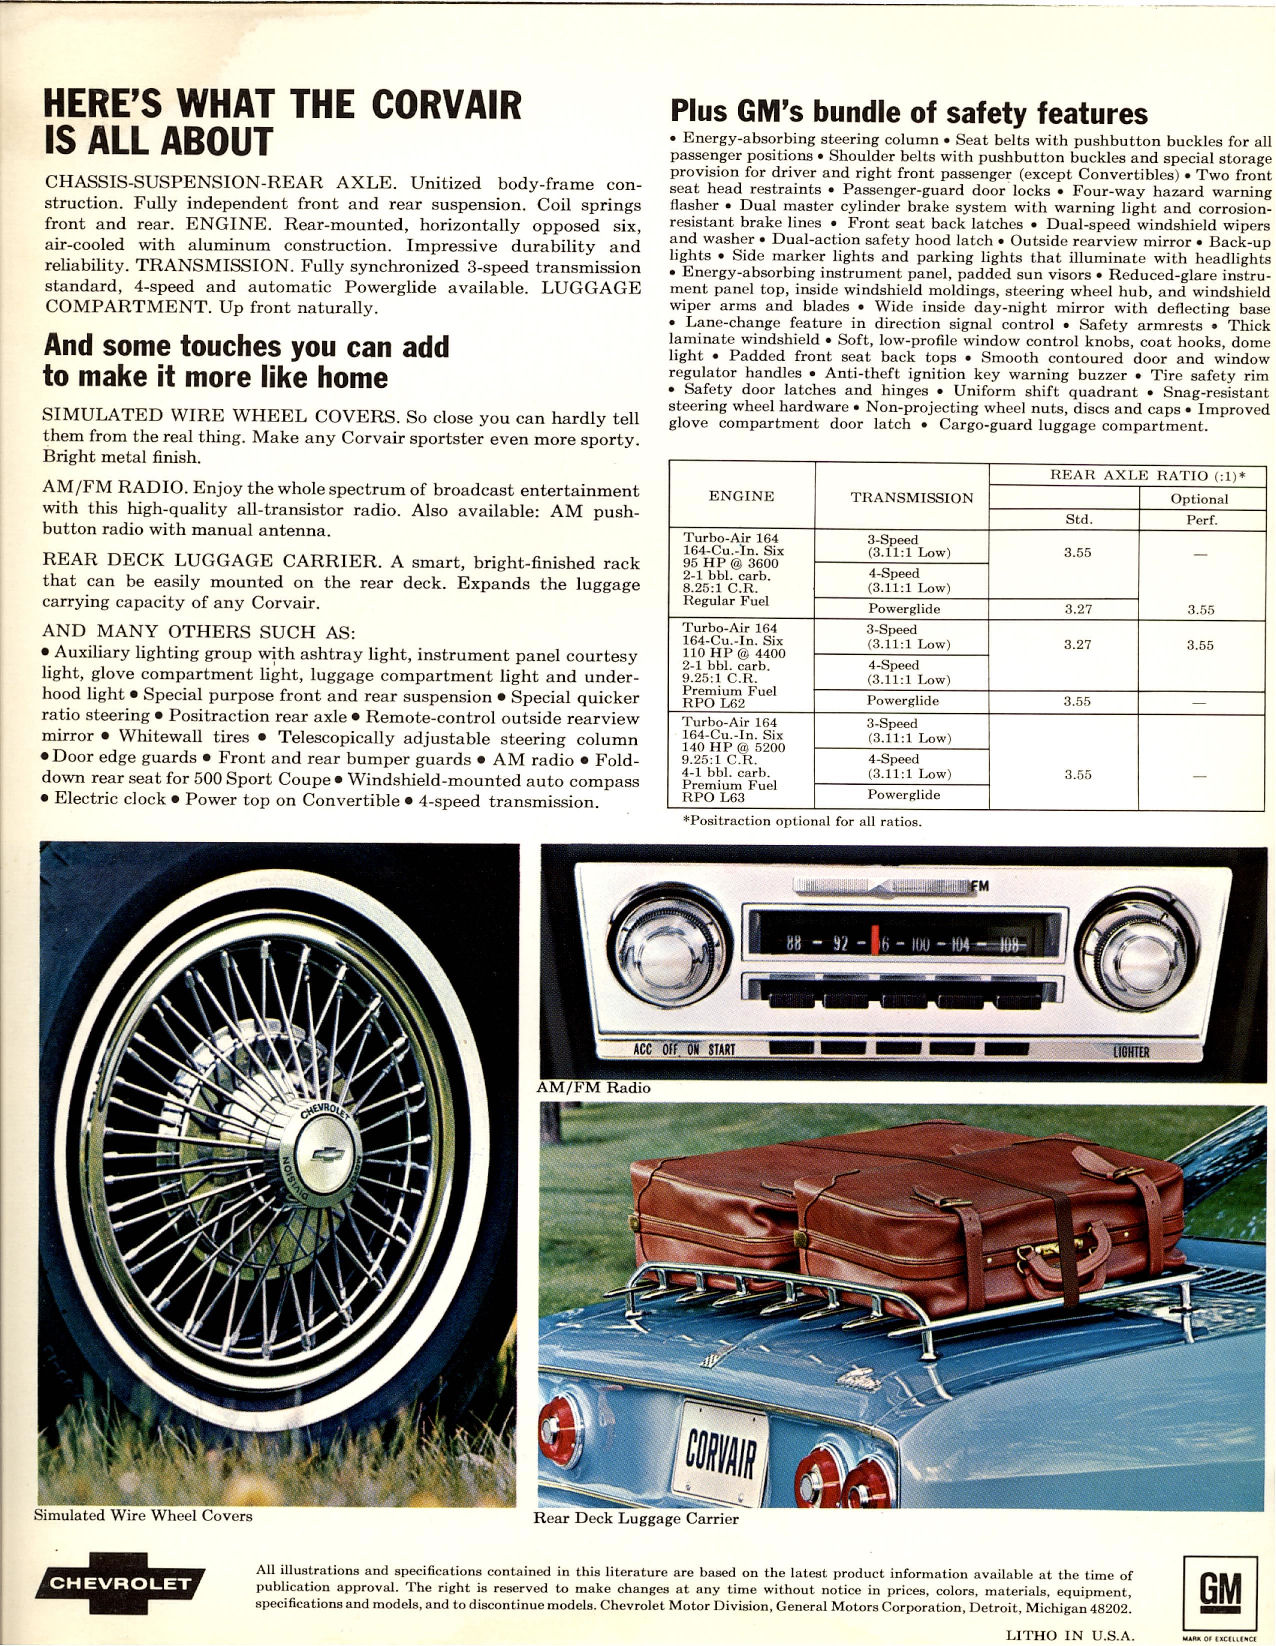 1969 Chevrolet Corvair Brochure Page 1